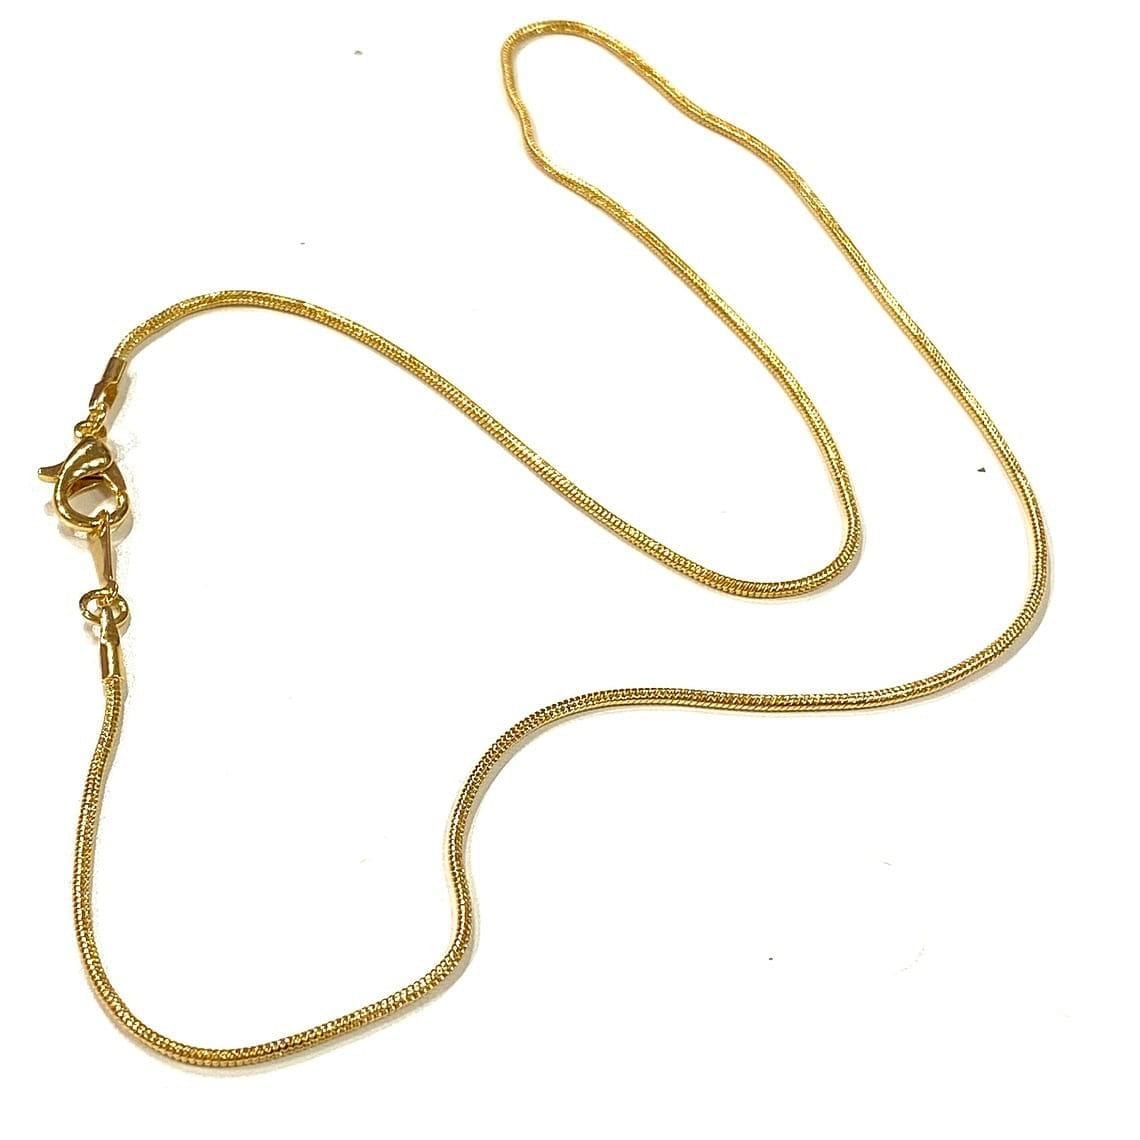 Gold Plated Snake Necklace Chain